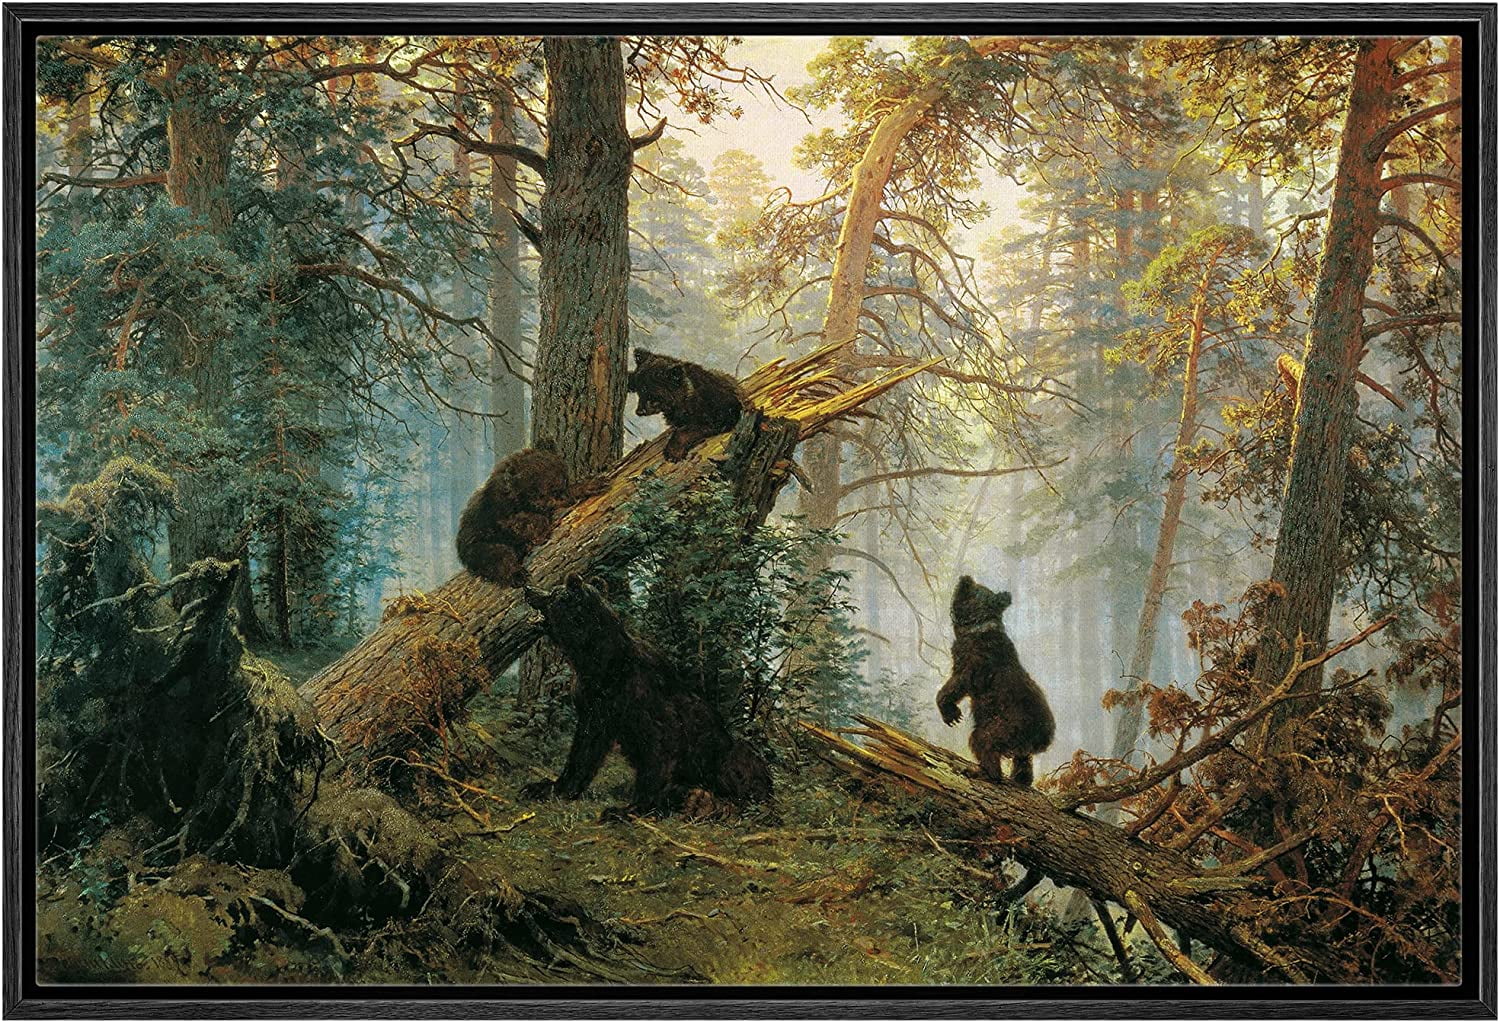 Framed Canvas Print Wall Art Black Bears in The Spring Forest Nature  Wilderness Illustrations Modern Art Rustic Scenic Colorful Multicolor for  Living Room, Bedroom, Office 16"x24" Black